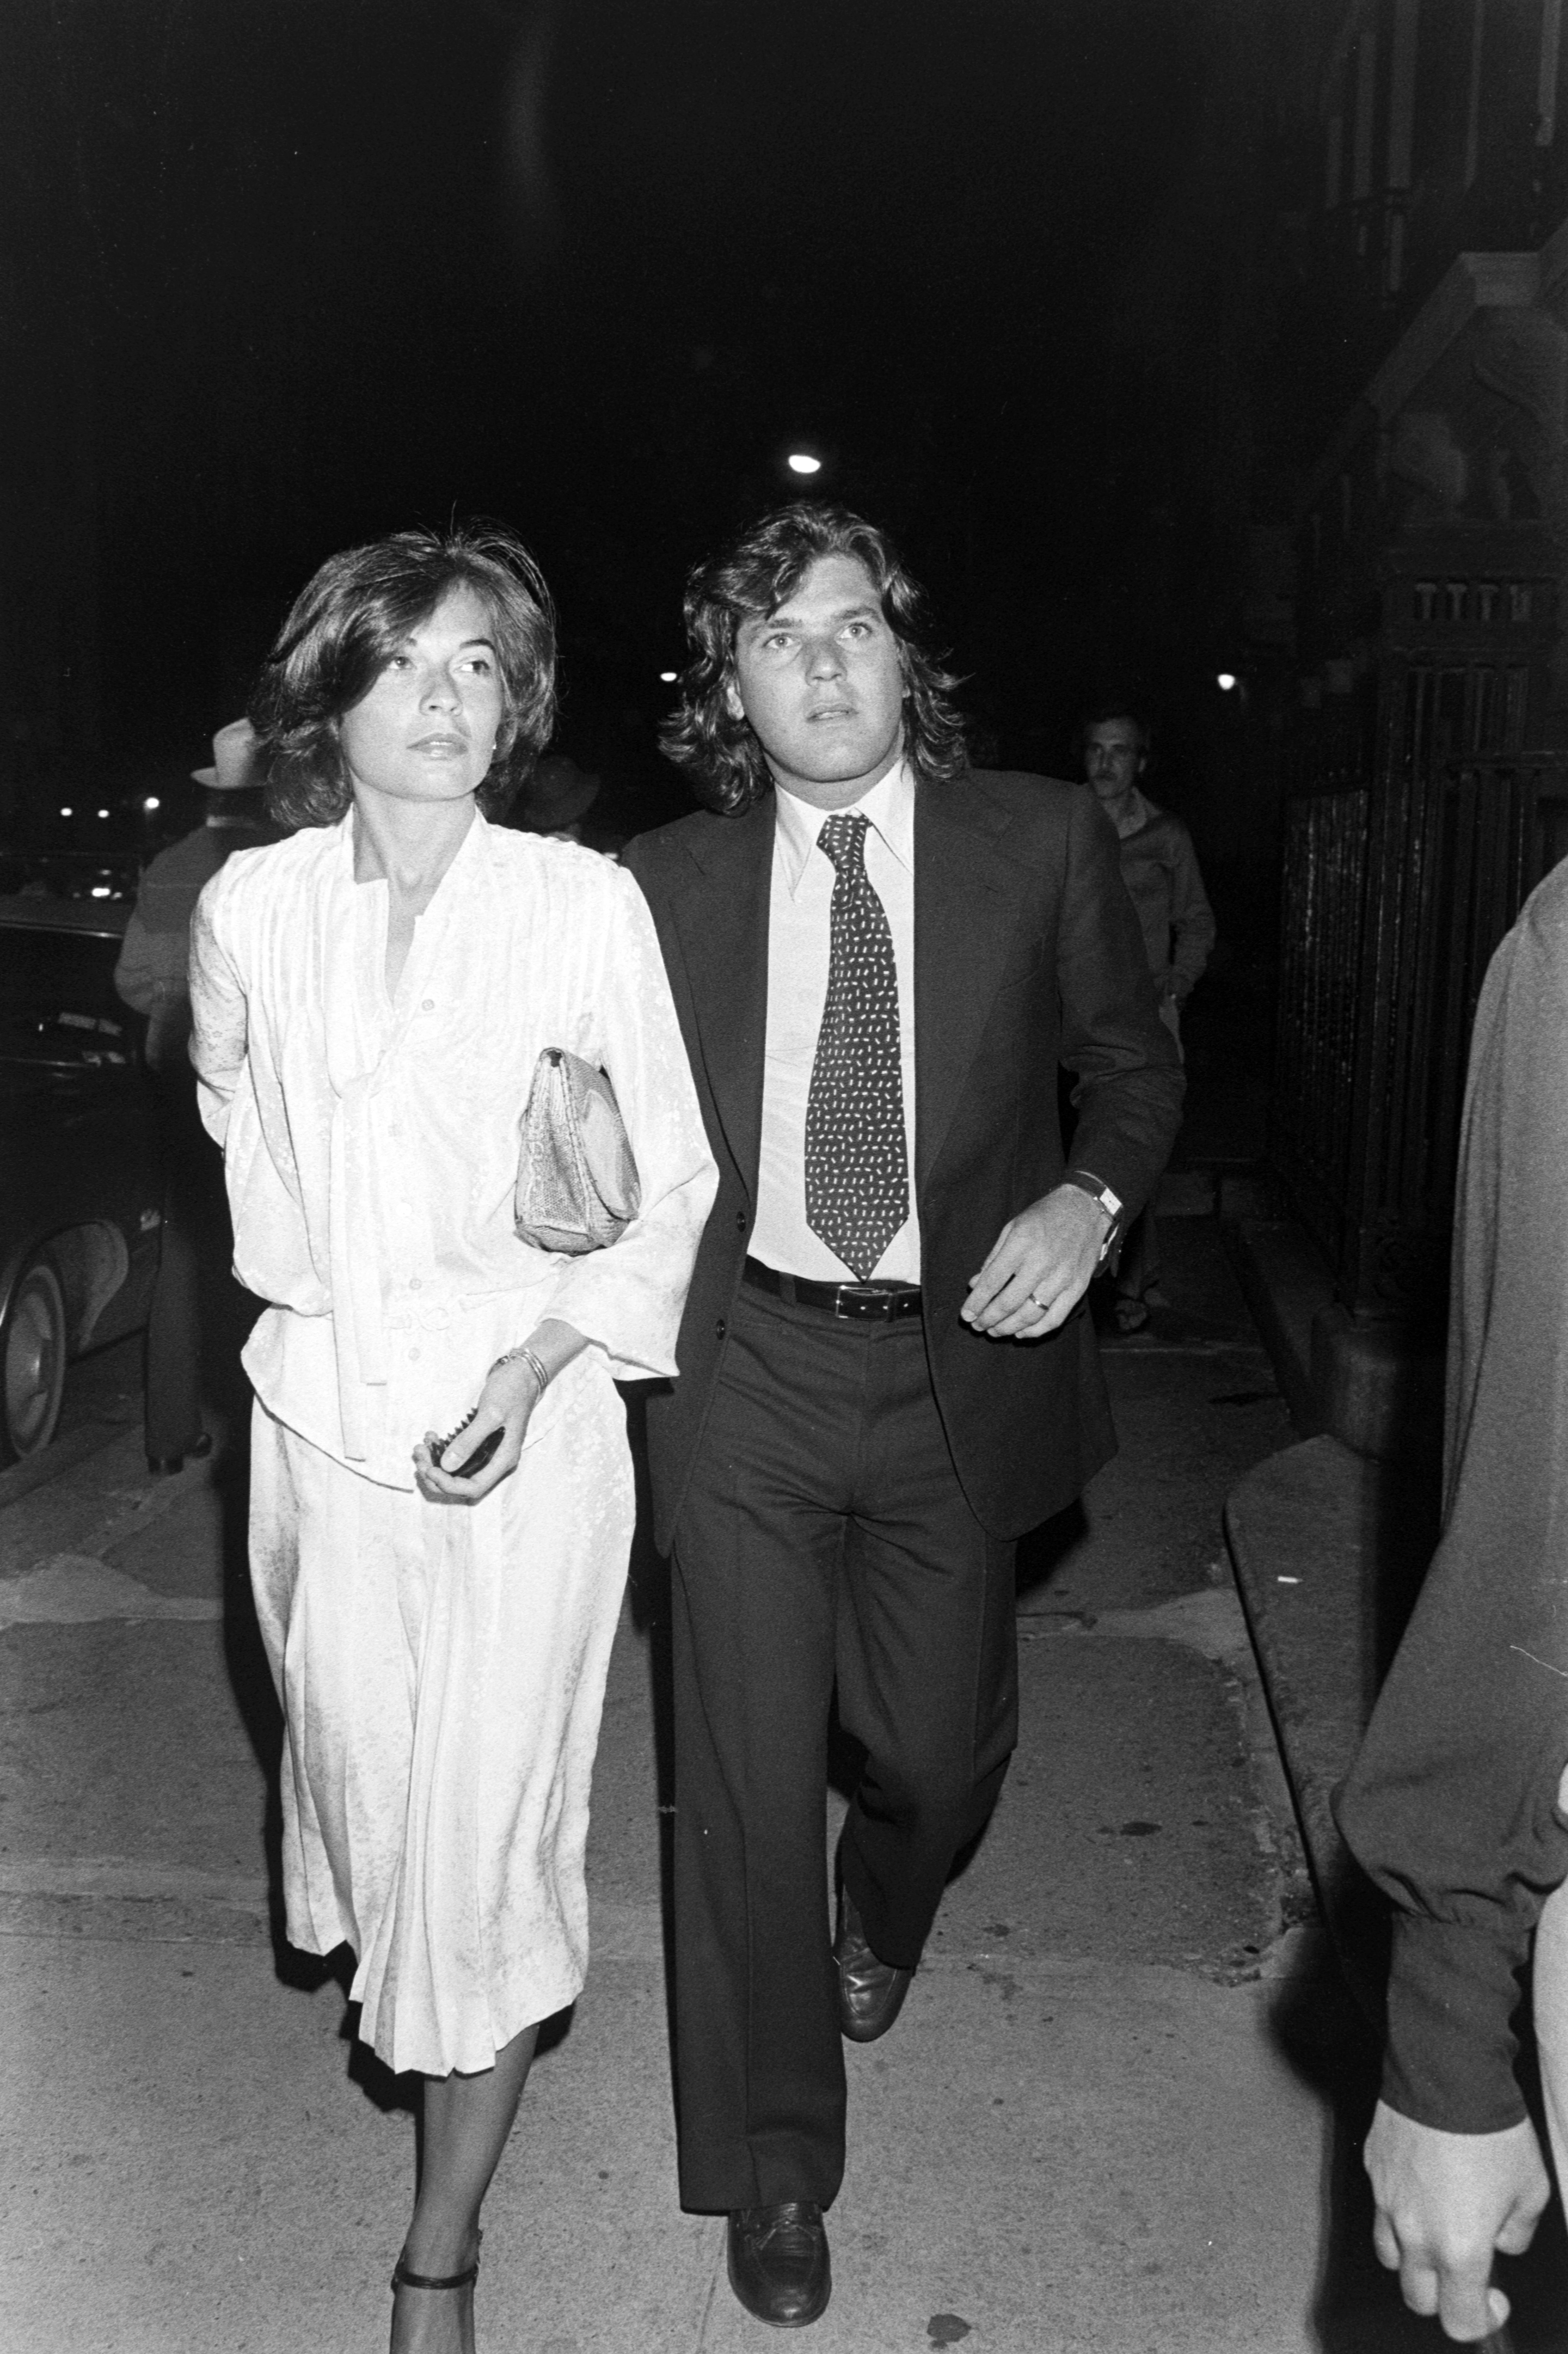 Jane Schindelheim and Jann Wenner attend a party on July 12,1976, in New York City. | Source: Getty Images